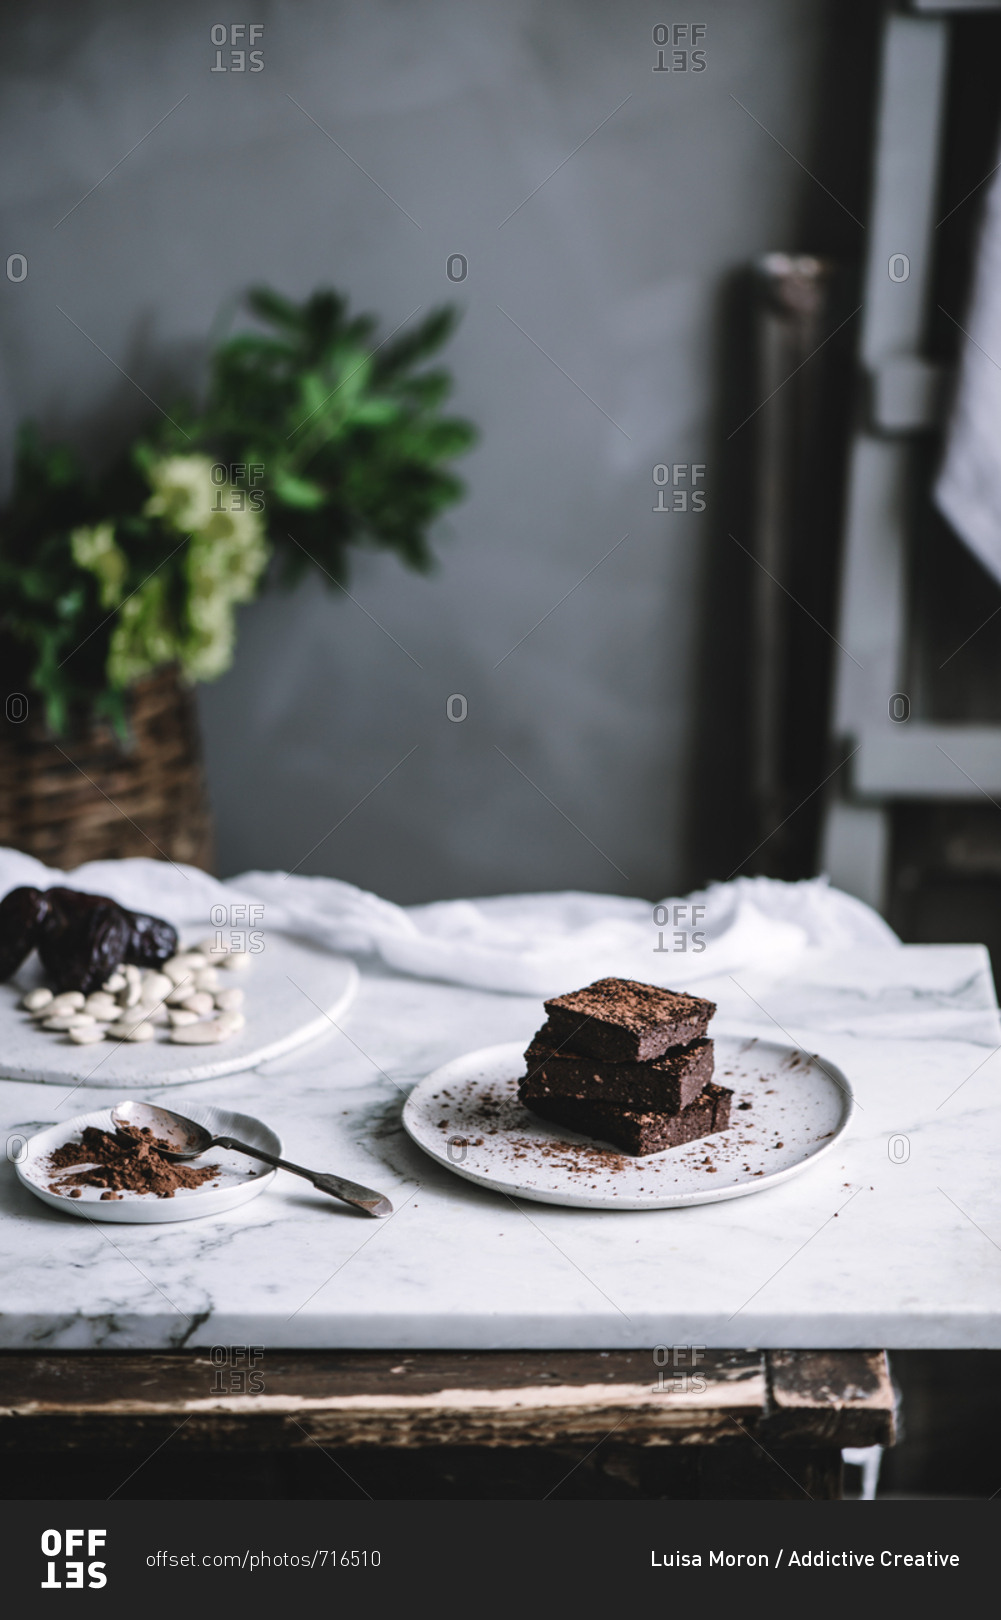 Tasty sweet vegan brownie dessert and cocoa powder on plate on a table.